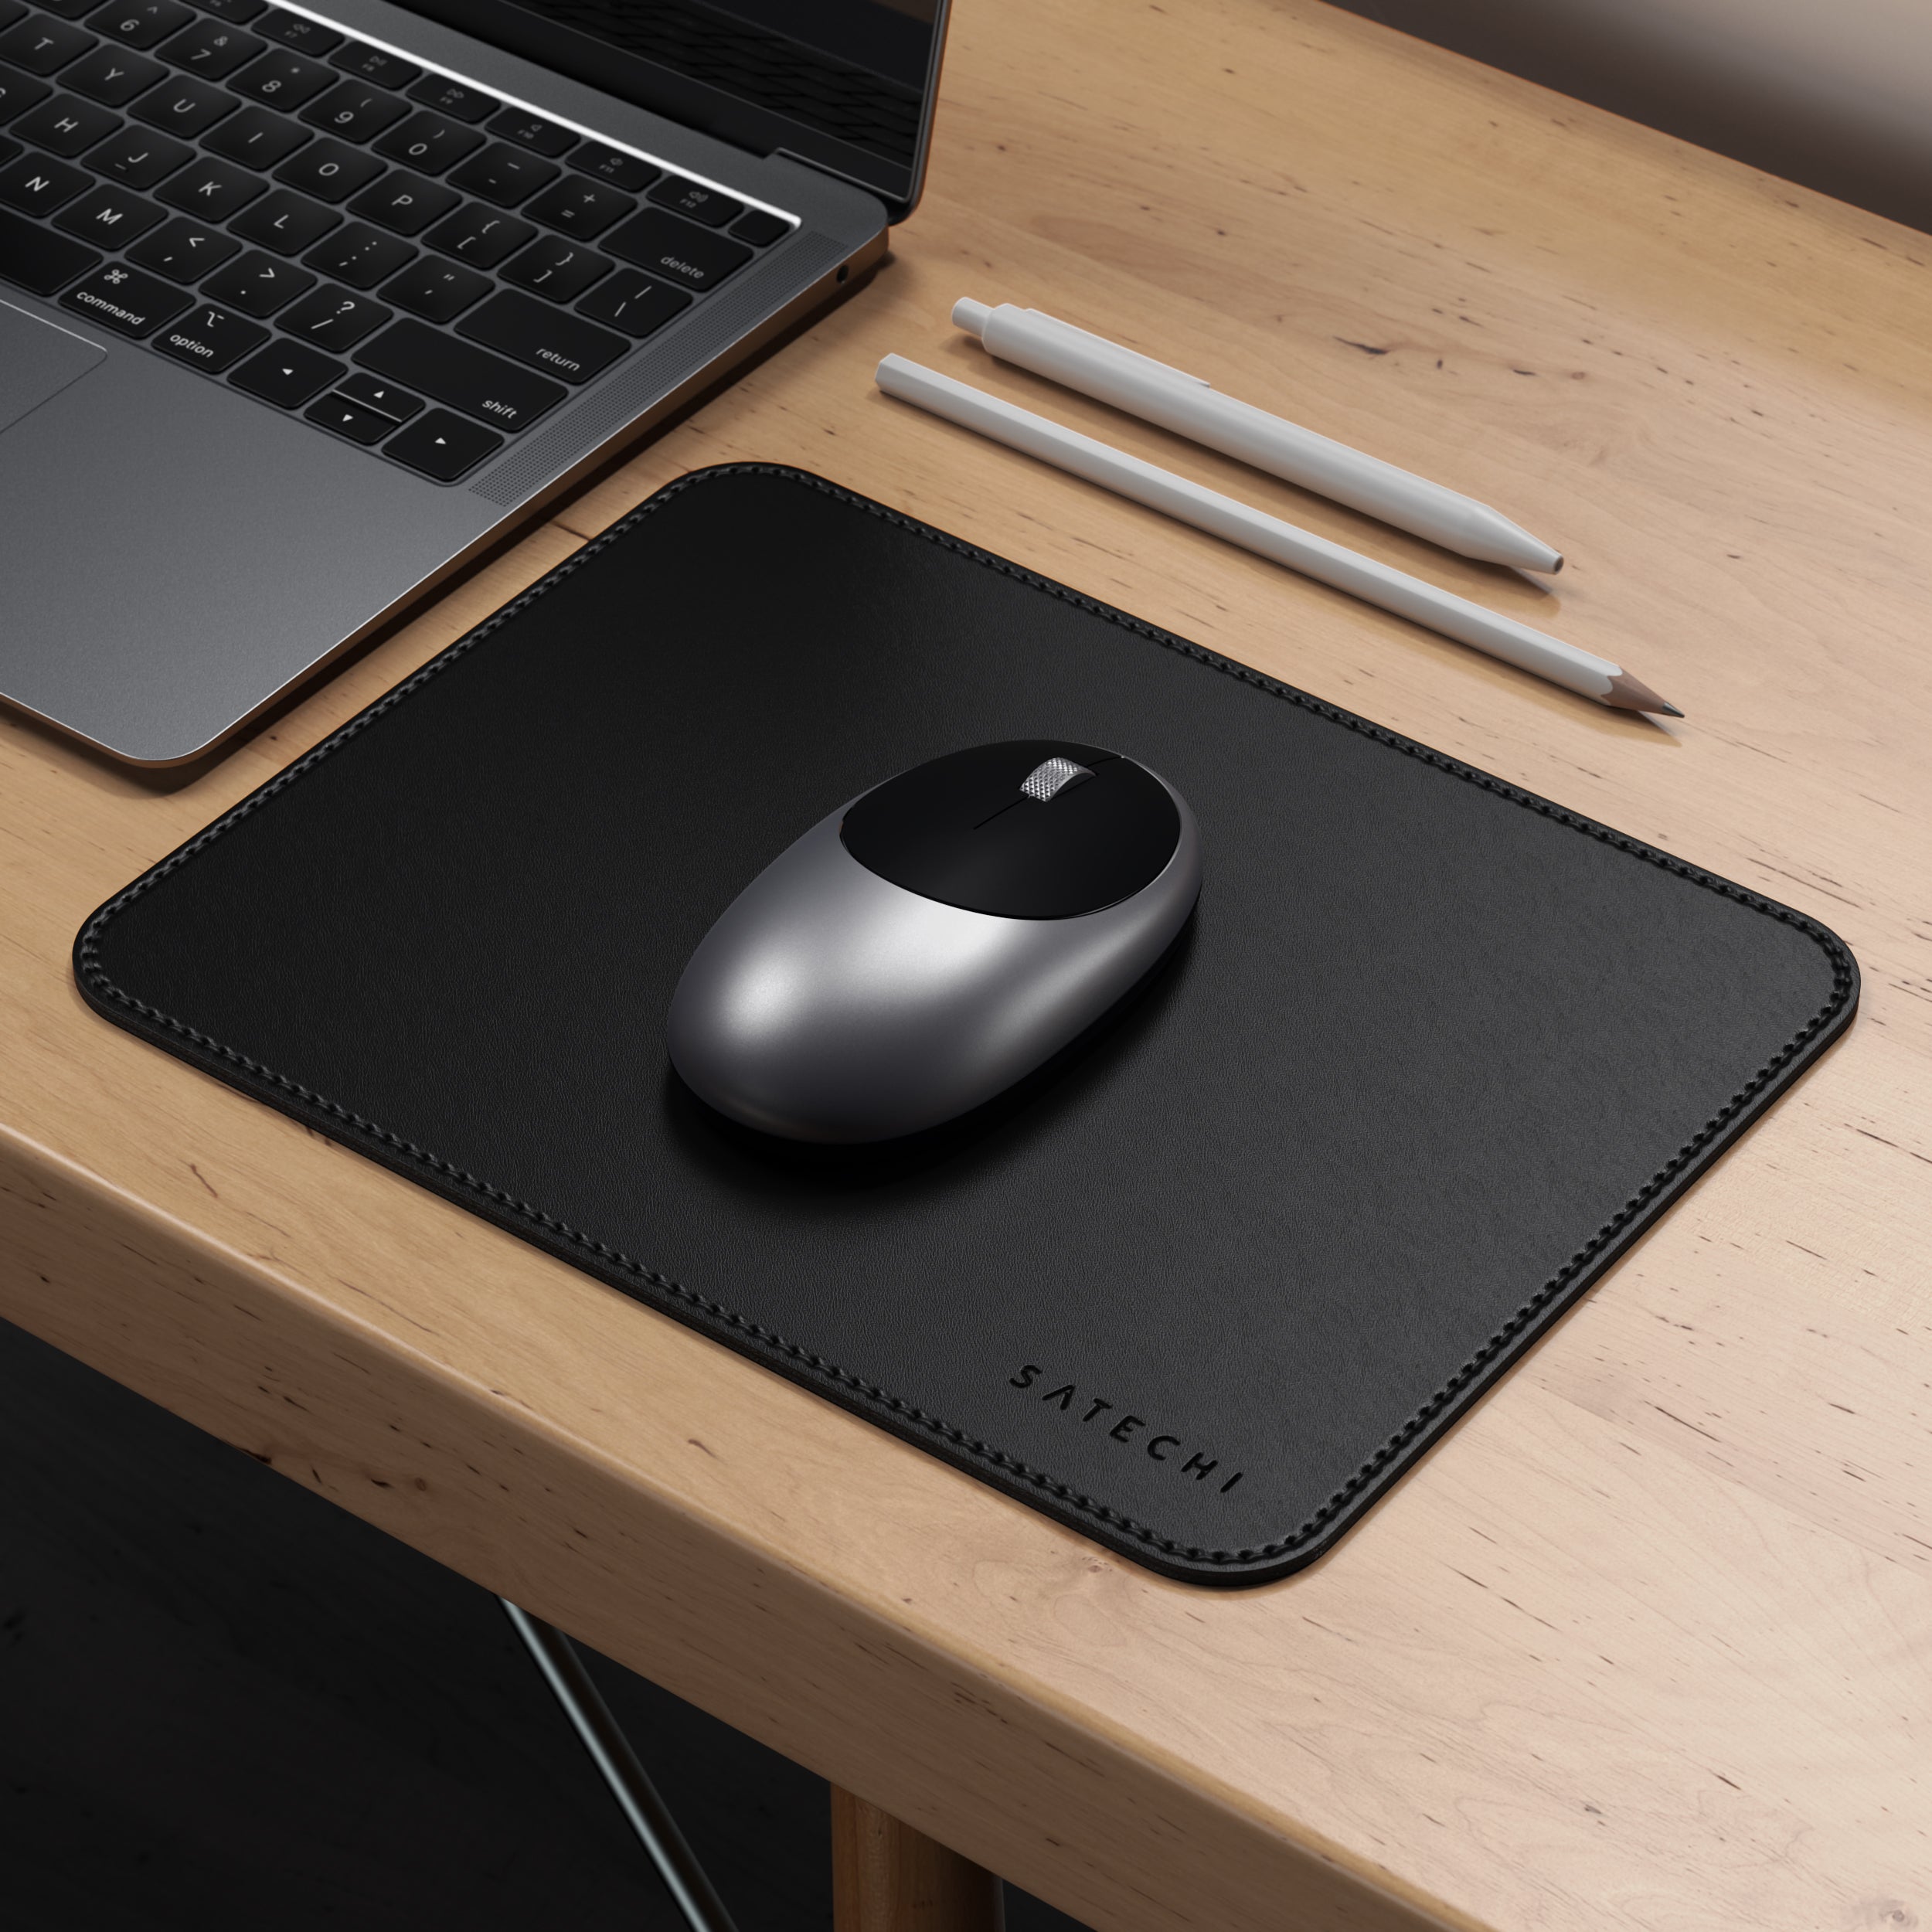 Satechi M1 Bluetooth Mouse, featuring Bluetooth 4.0 connection